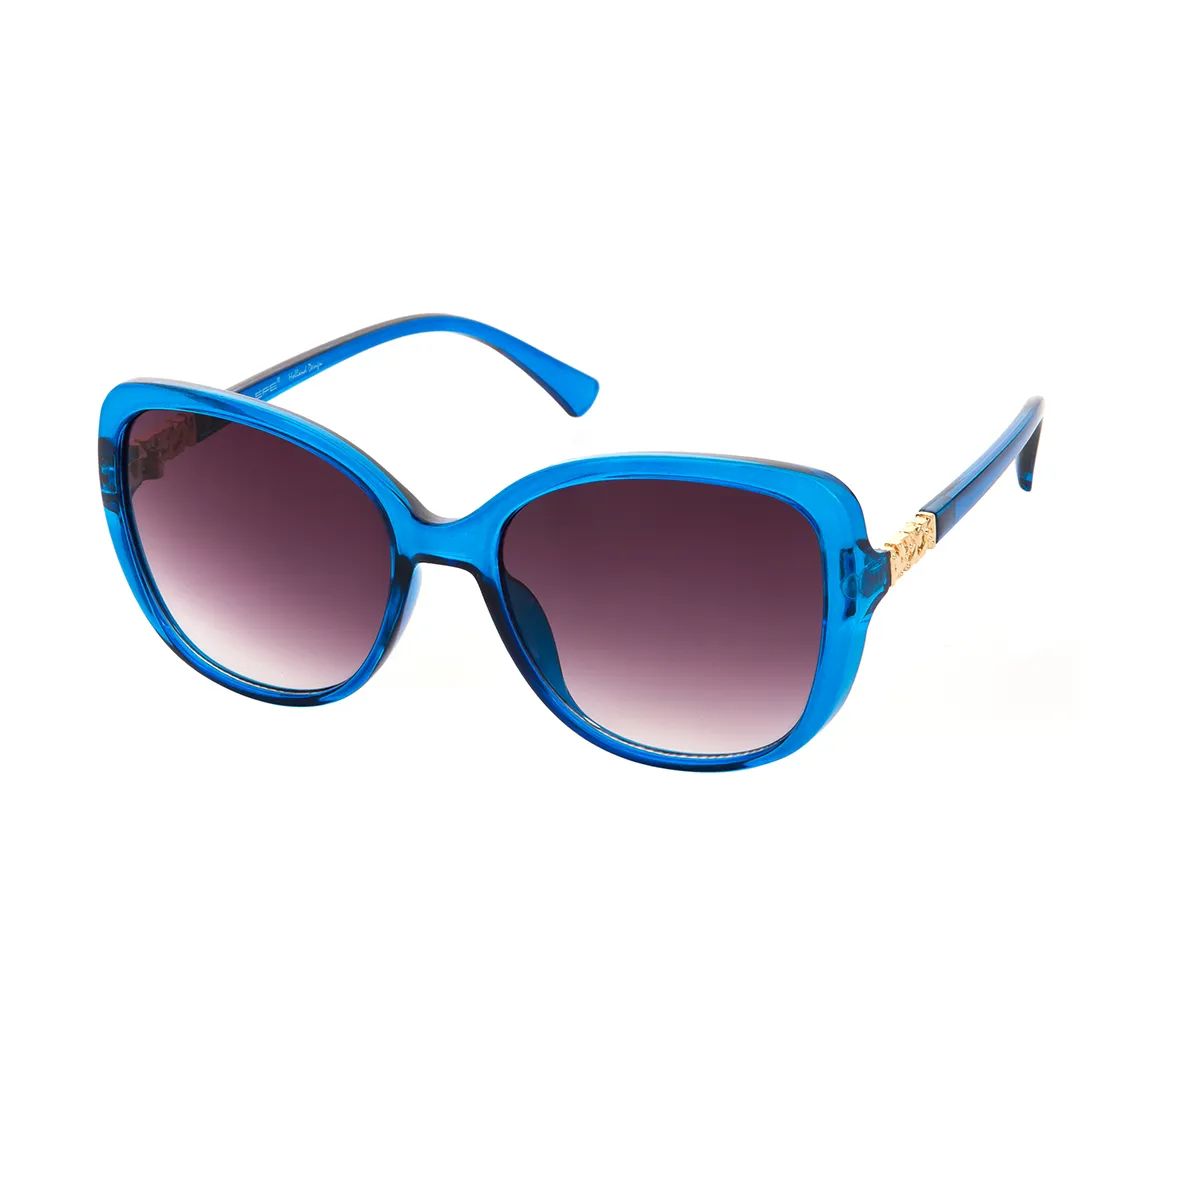 Darry - Oval Blue Sunglasses for Women